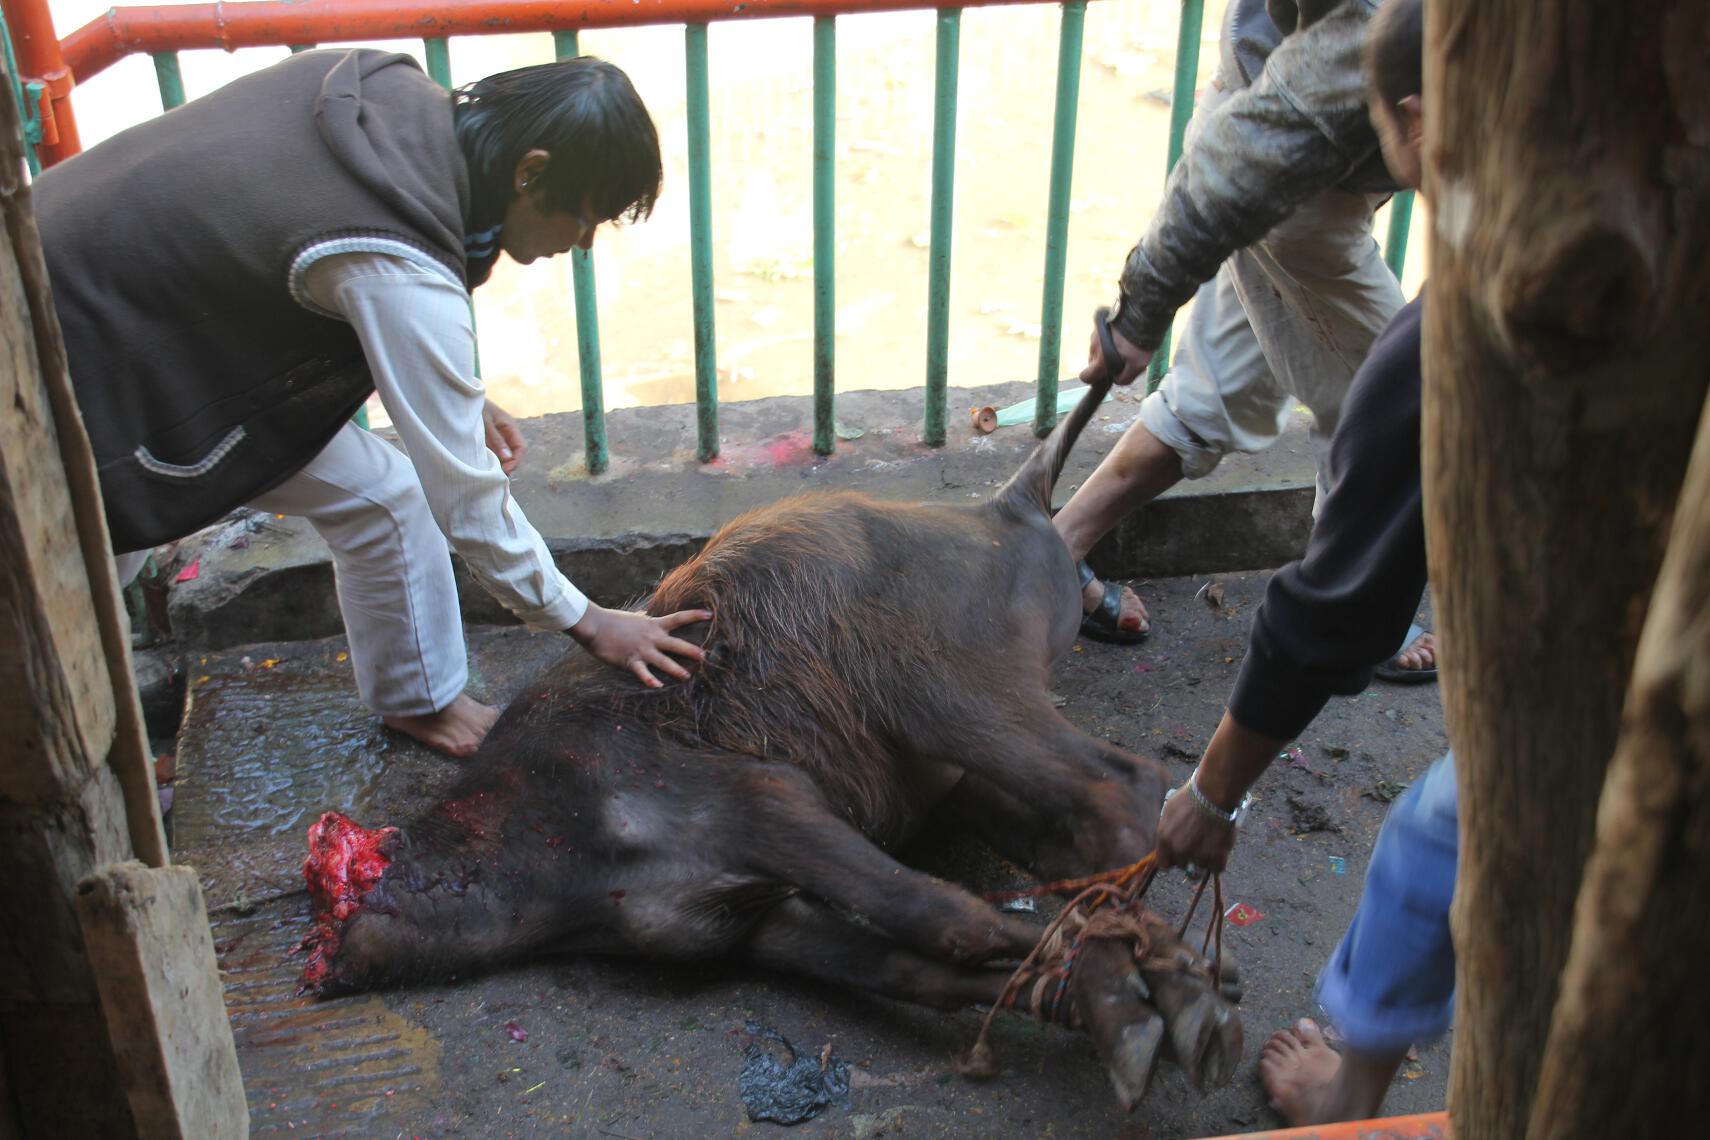 A family drags a beheaded bull from Kali's temple to be butchered and roasted.